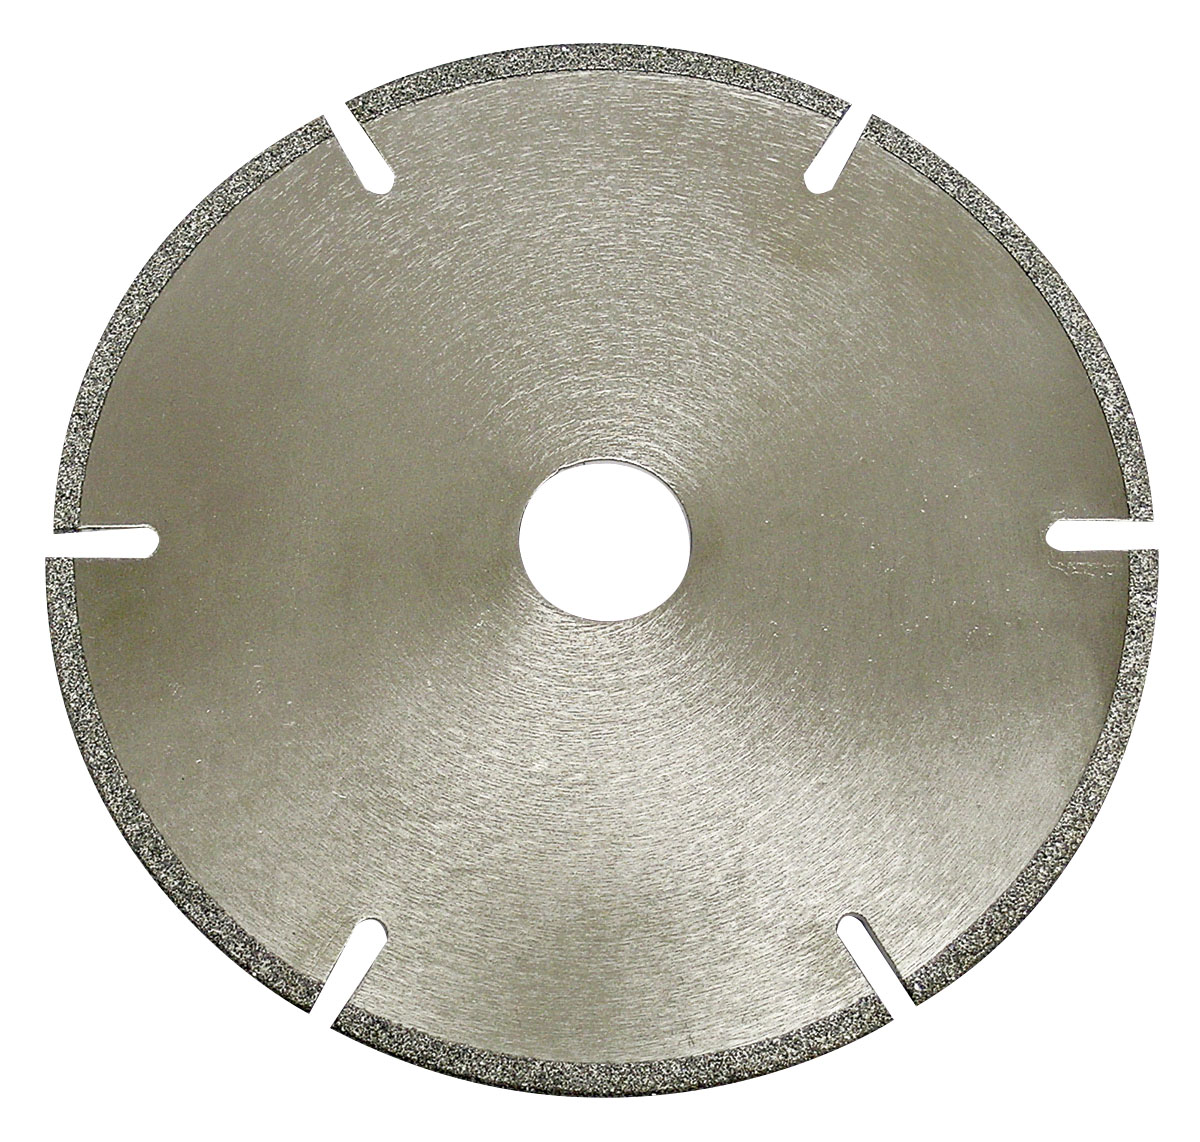 3" (76 mm) Dia. x 3/8" (10 mm) CH 40/50 Grit Gulleted/Slotted Diamond Cut-Off Wheel